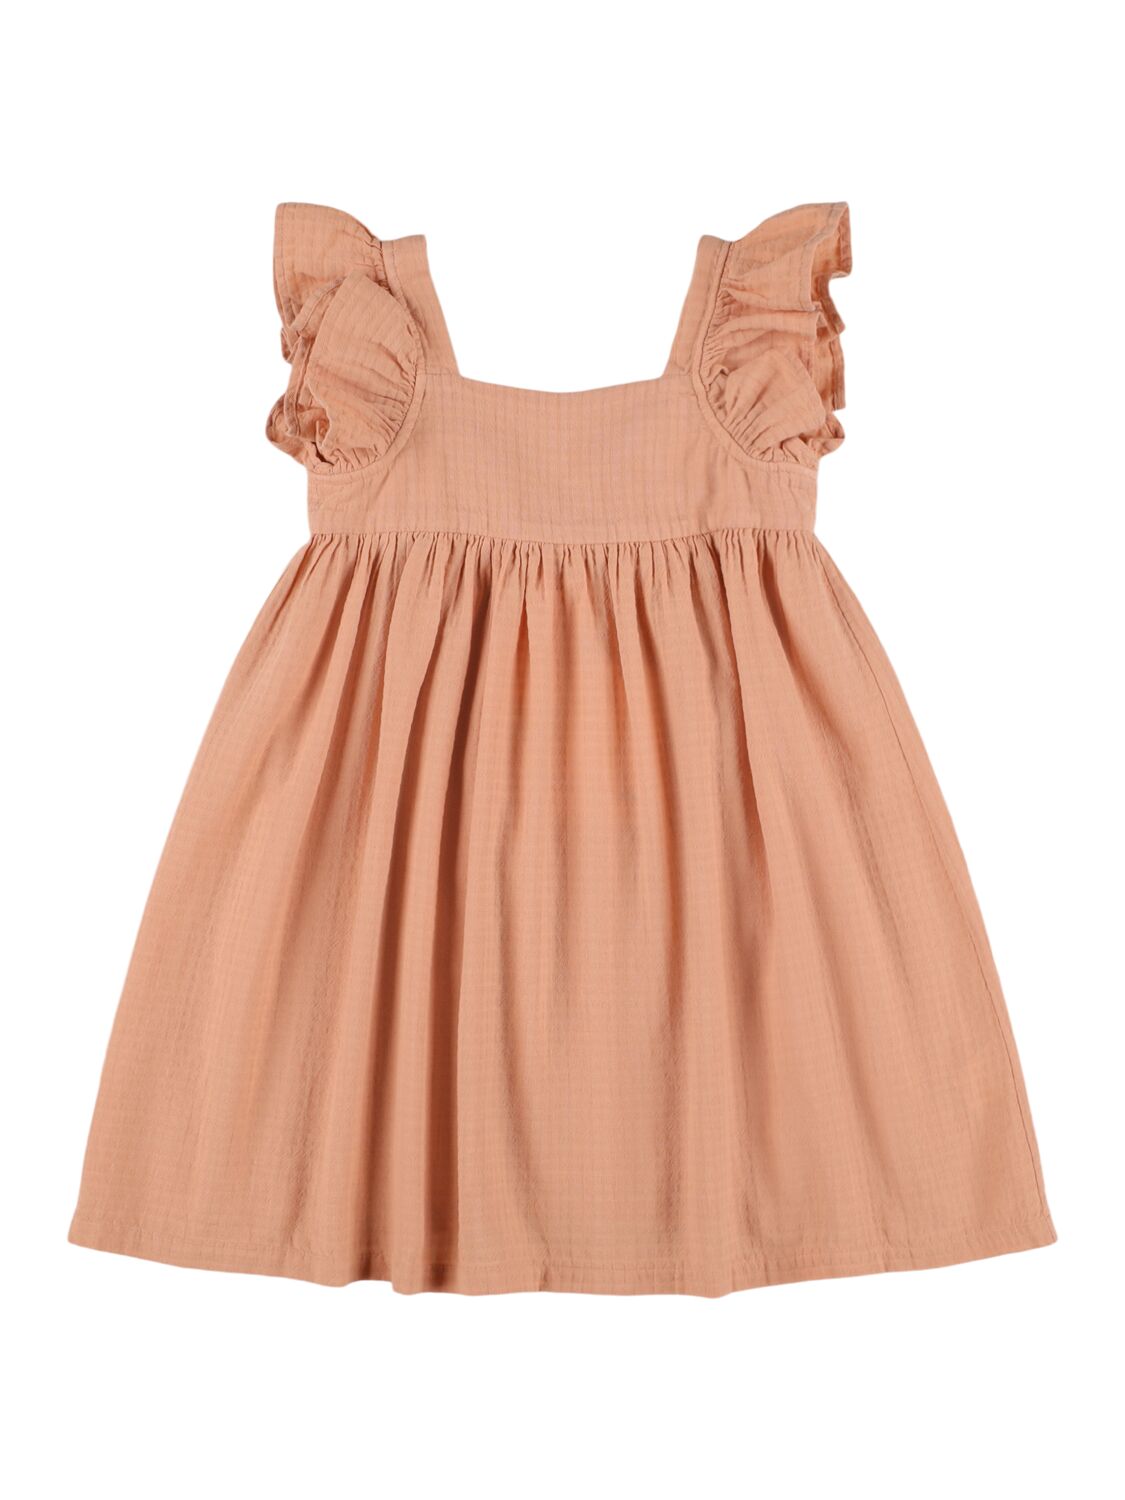 The New Society Kids' Organic Cotton Dress In Powder Pink